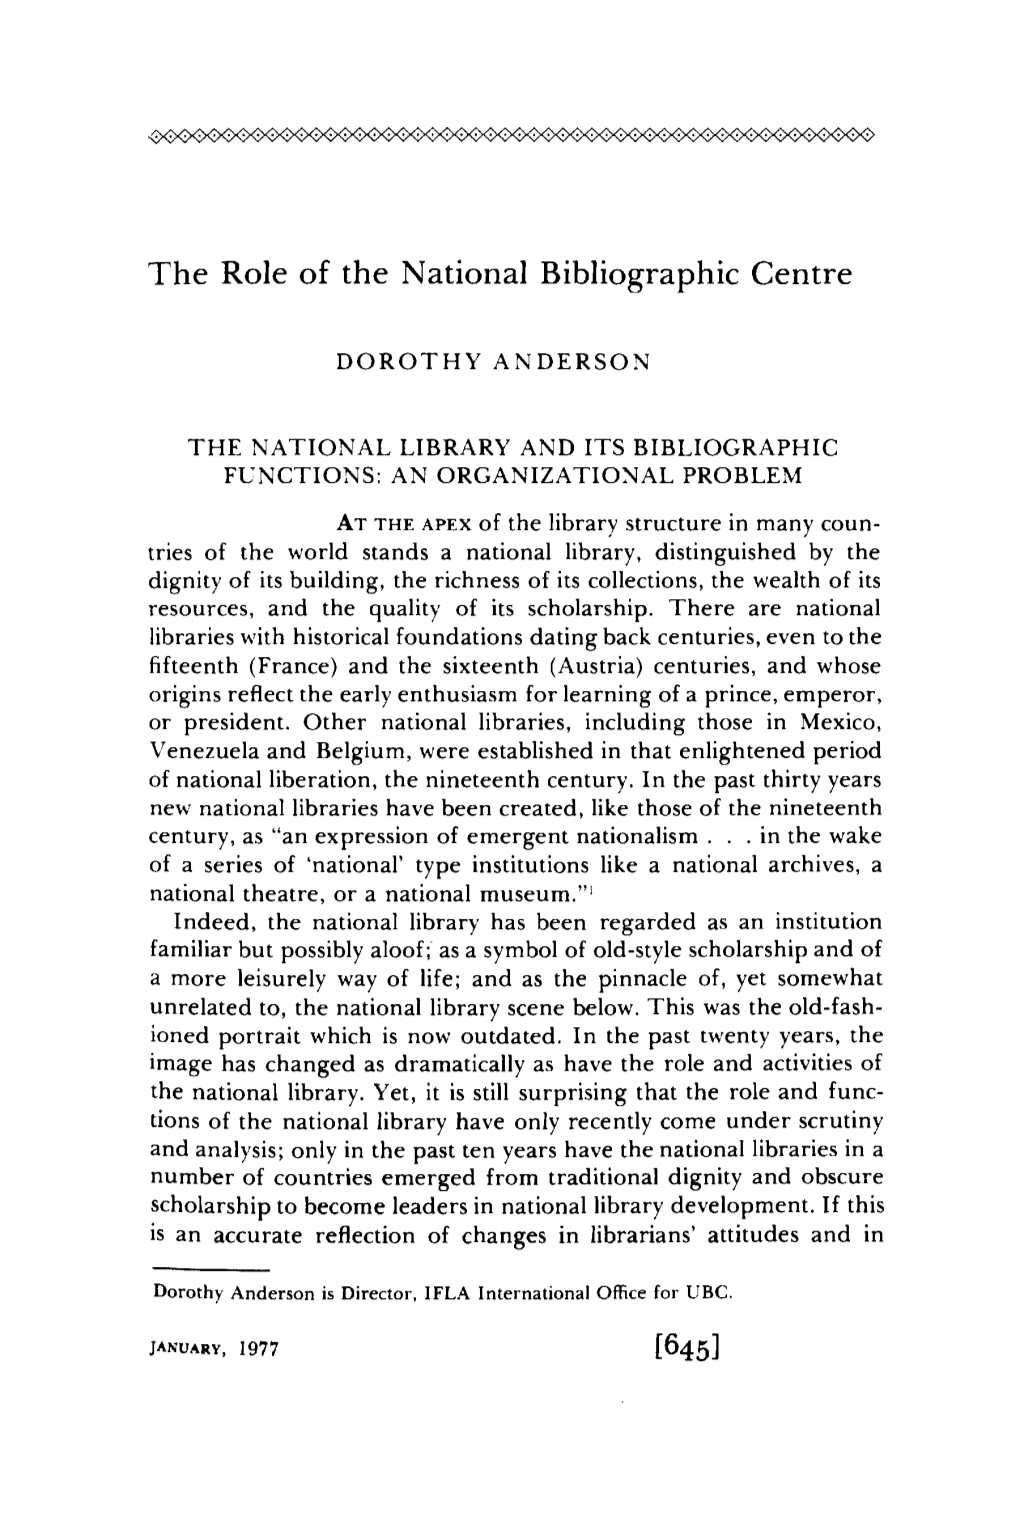 The Role of the National Bibliographic Centre